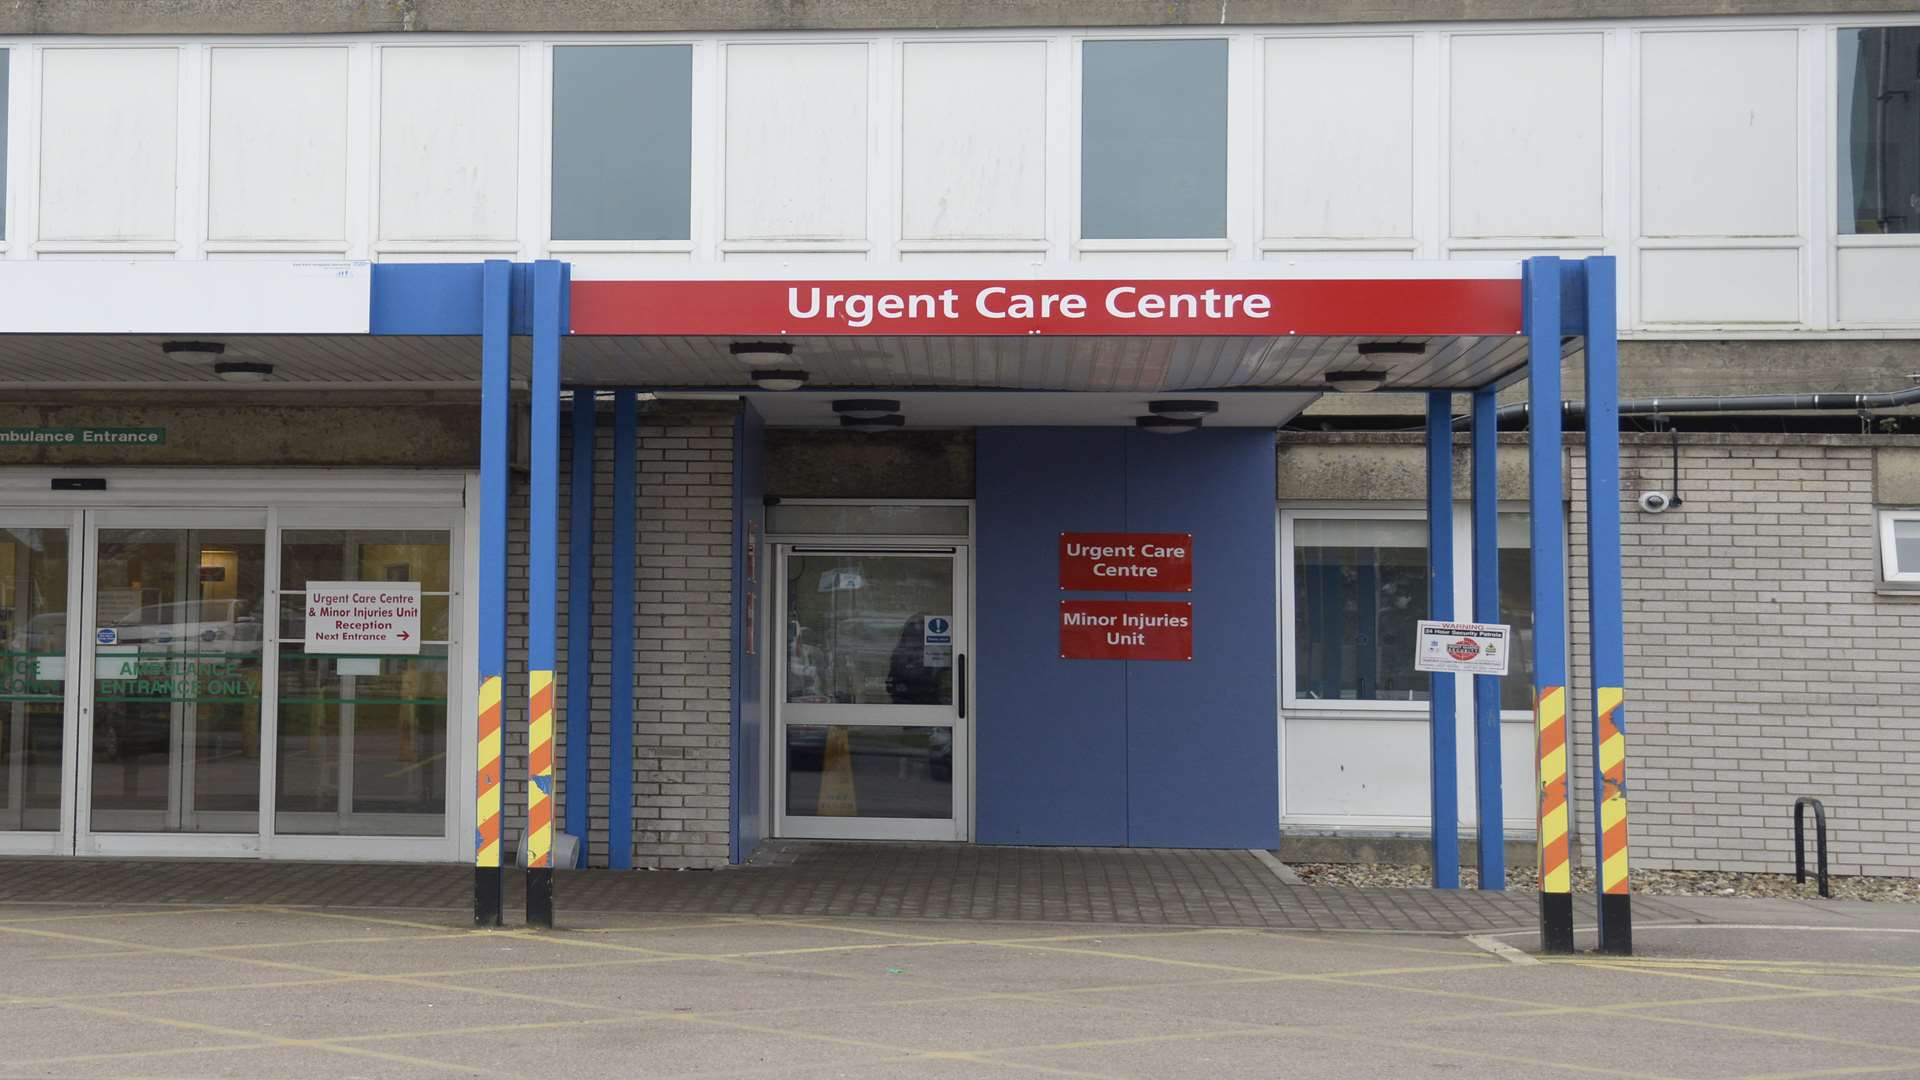 The Urgent Care Centre at the Kent & Canterbury Hospital is facing closure.